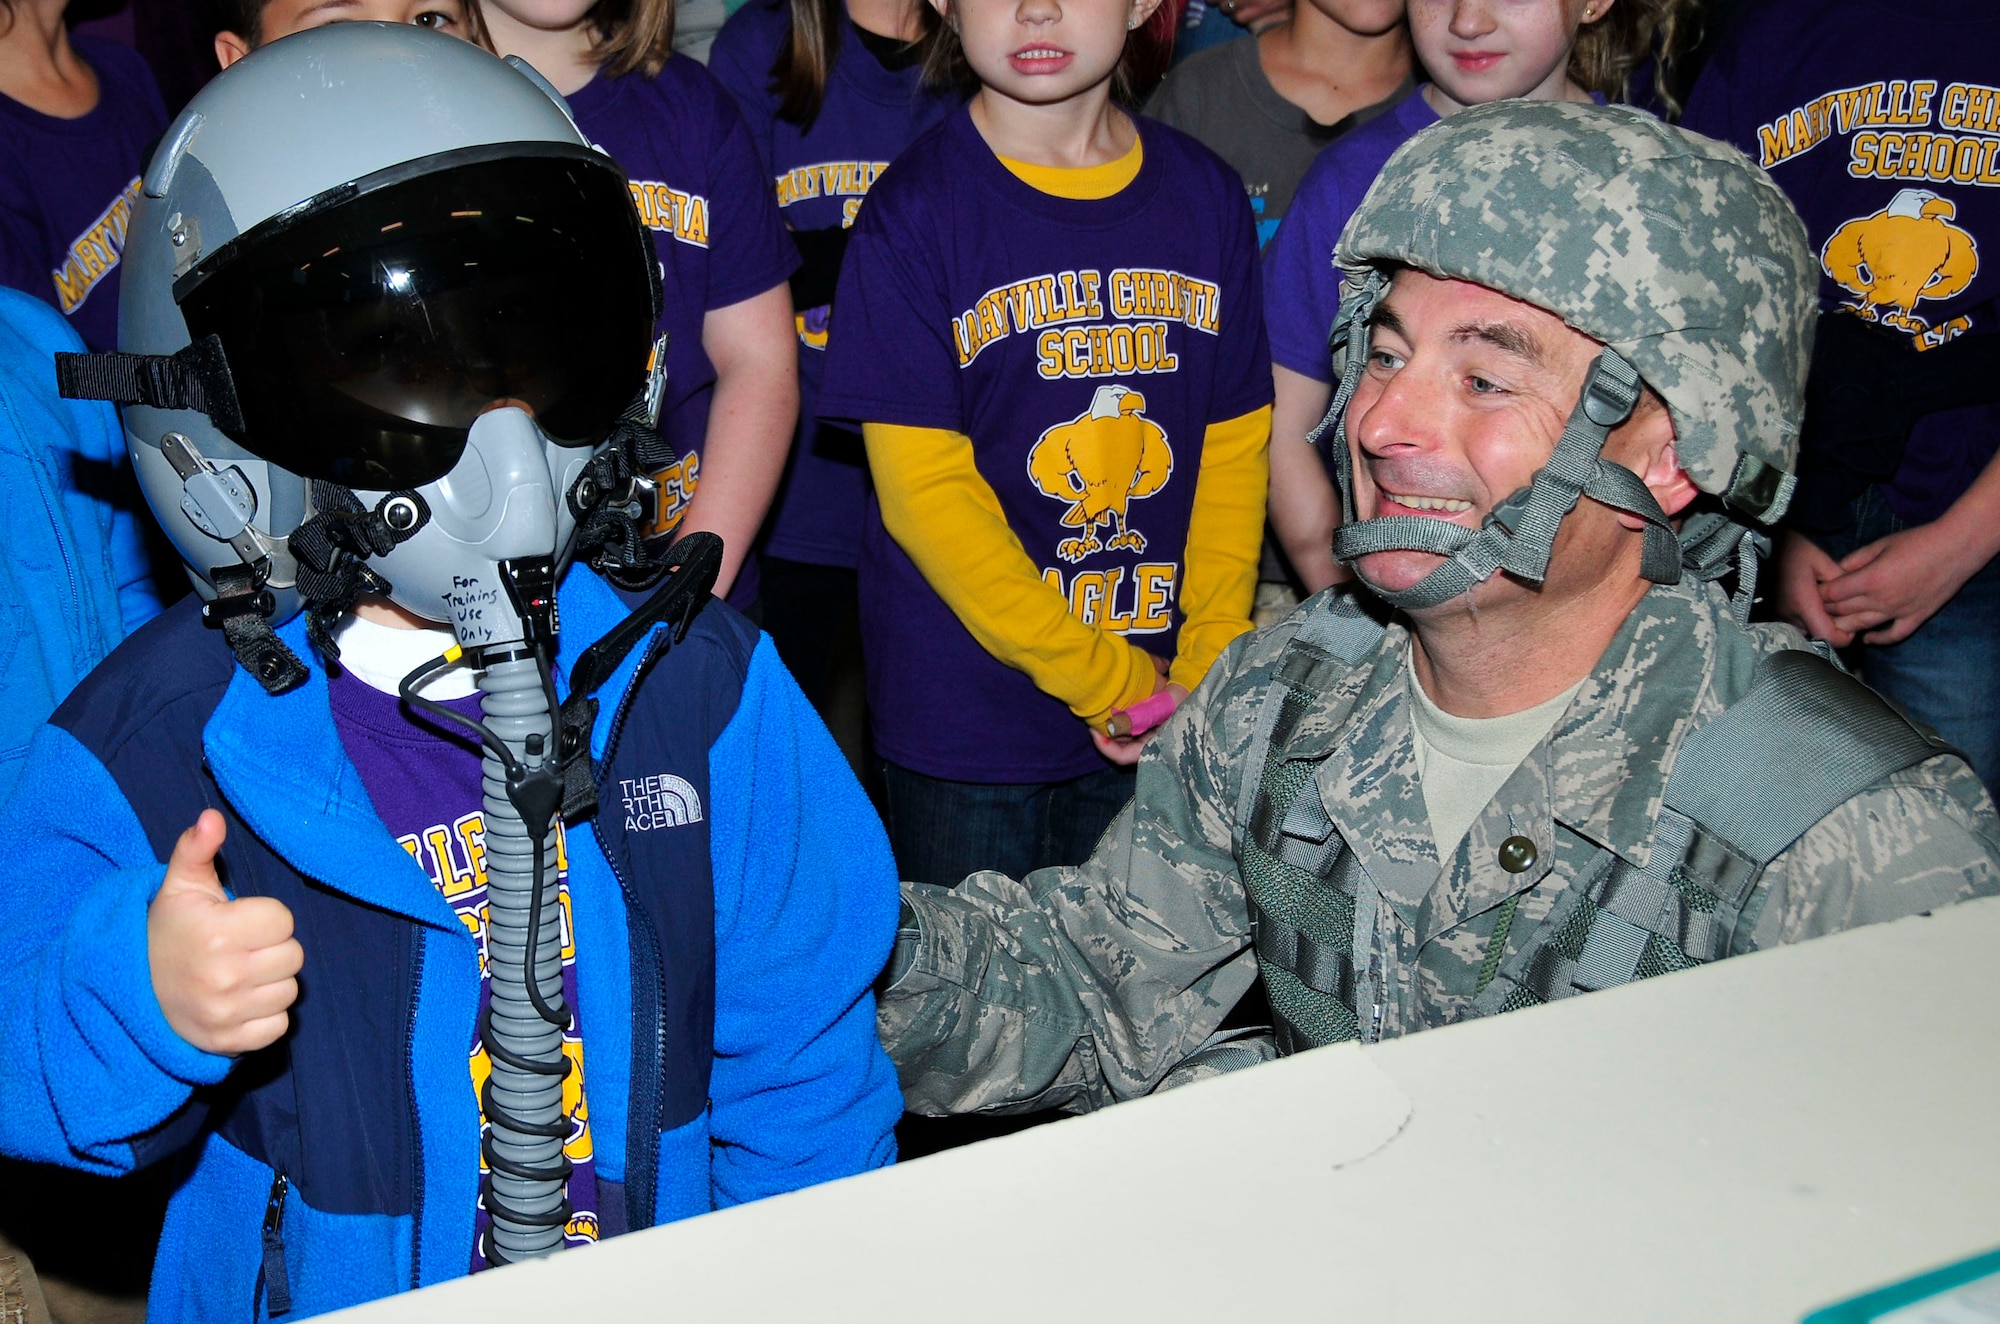 Tech. Sgt. Jon Crawford, 134 ARW Aircrew Flight Equipment Specialist, smiles as Caden Jones, a Maryville Christian School 1st grader, gives a thumbs up while wearing pilot training gear.  Caden's father, Master Sgt. Eric Jones, is a Boom Operator with the 134th Air Refueling Wing.  (U.S. Air National Guard photo by Master Sgt. Kendra M. Owenby, 134 ARW Public Affairs)